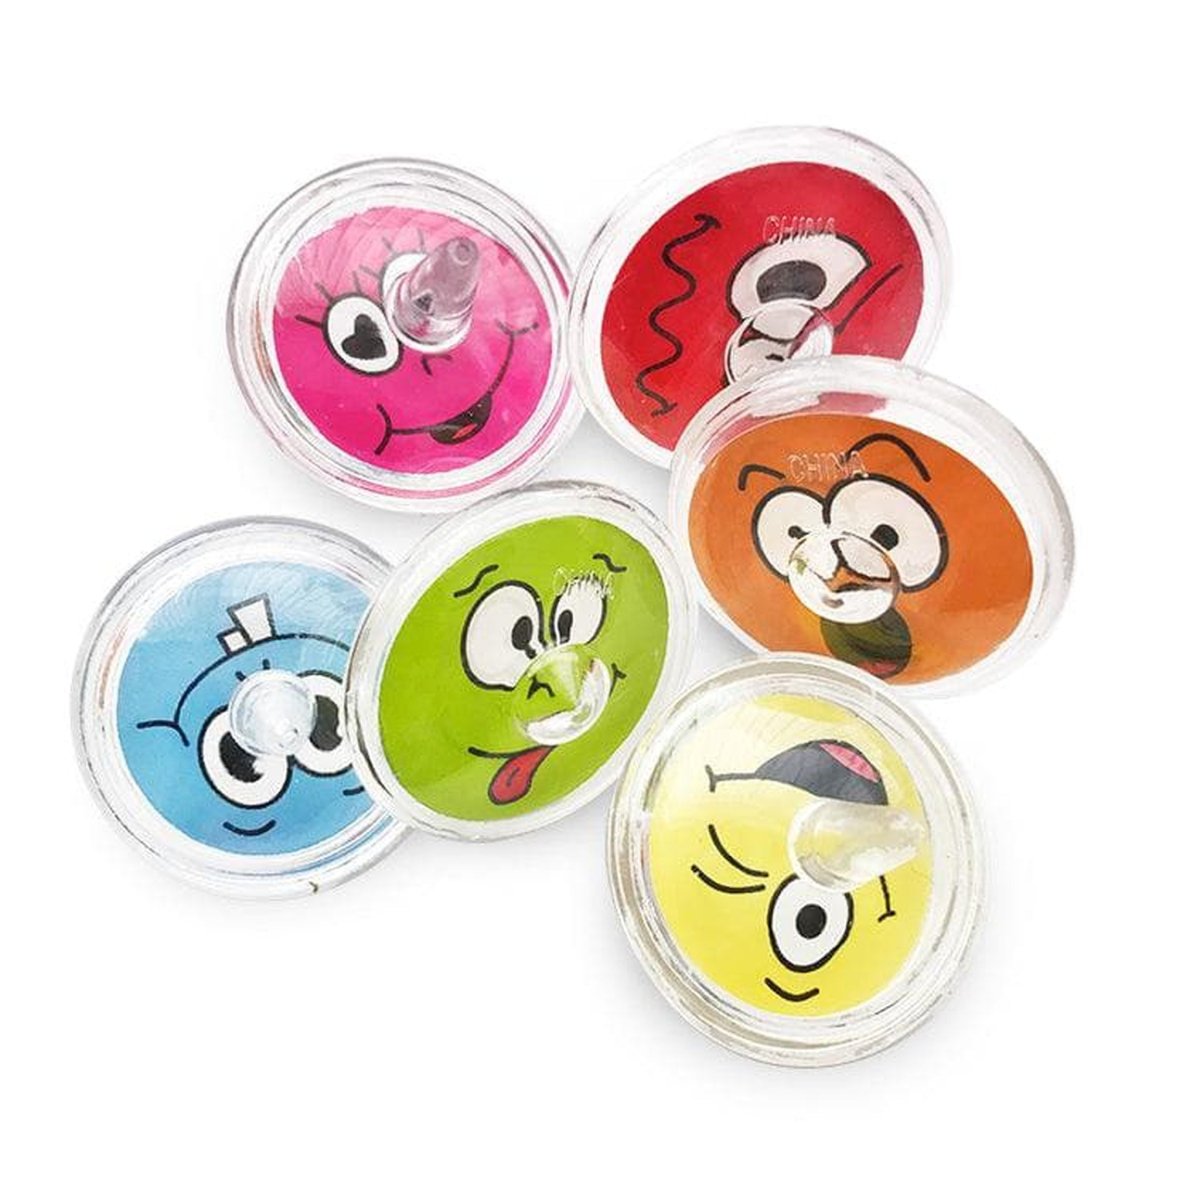 Funny Faces Spinning Top - Kids Party Craft